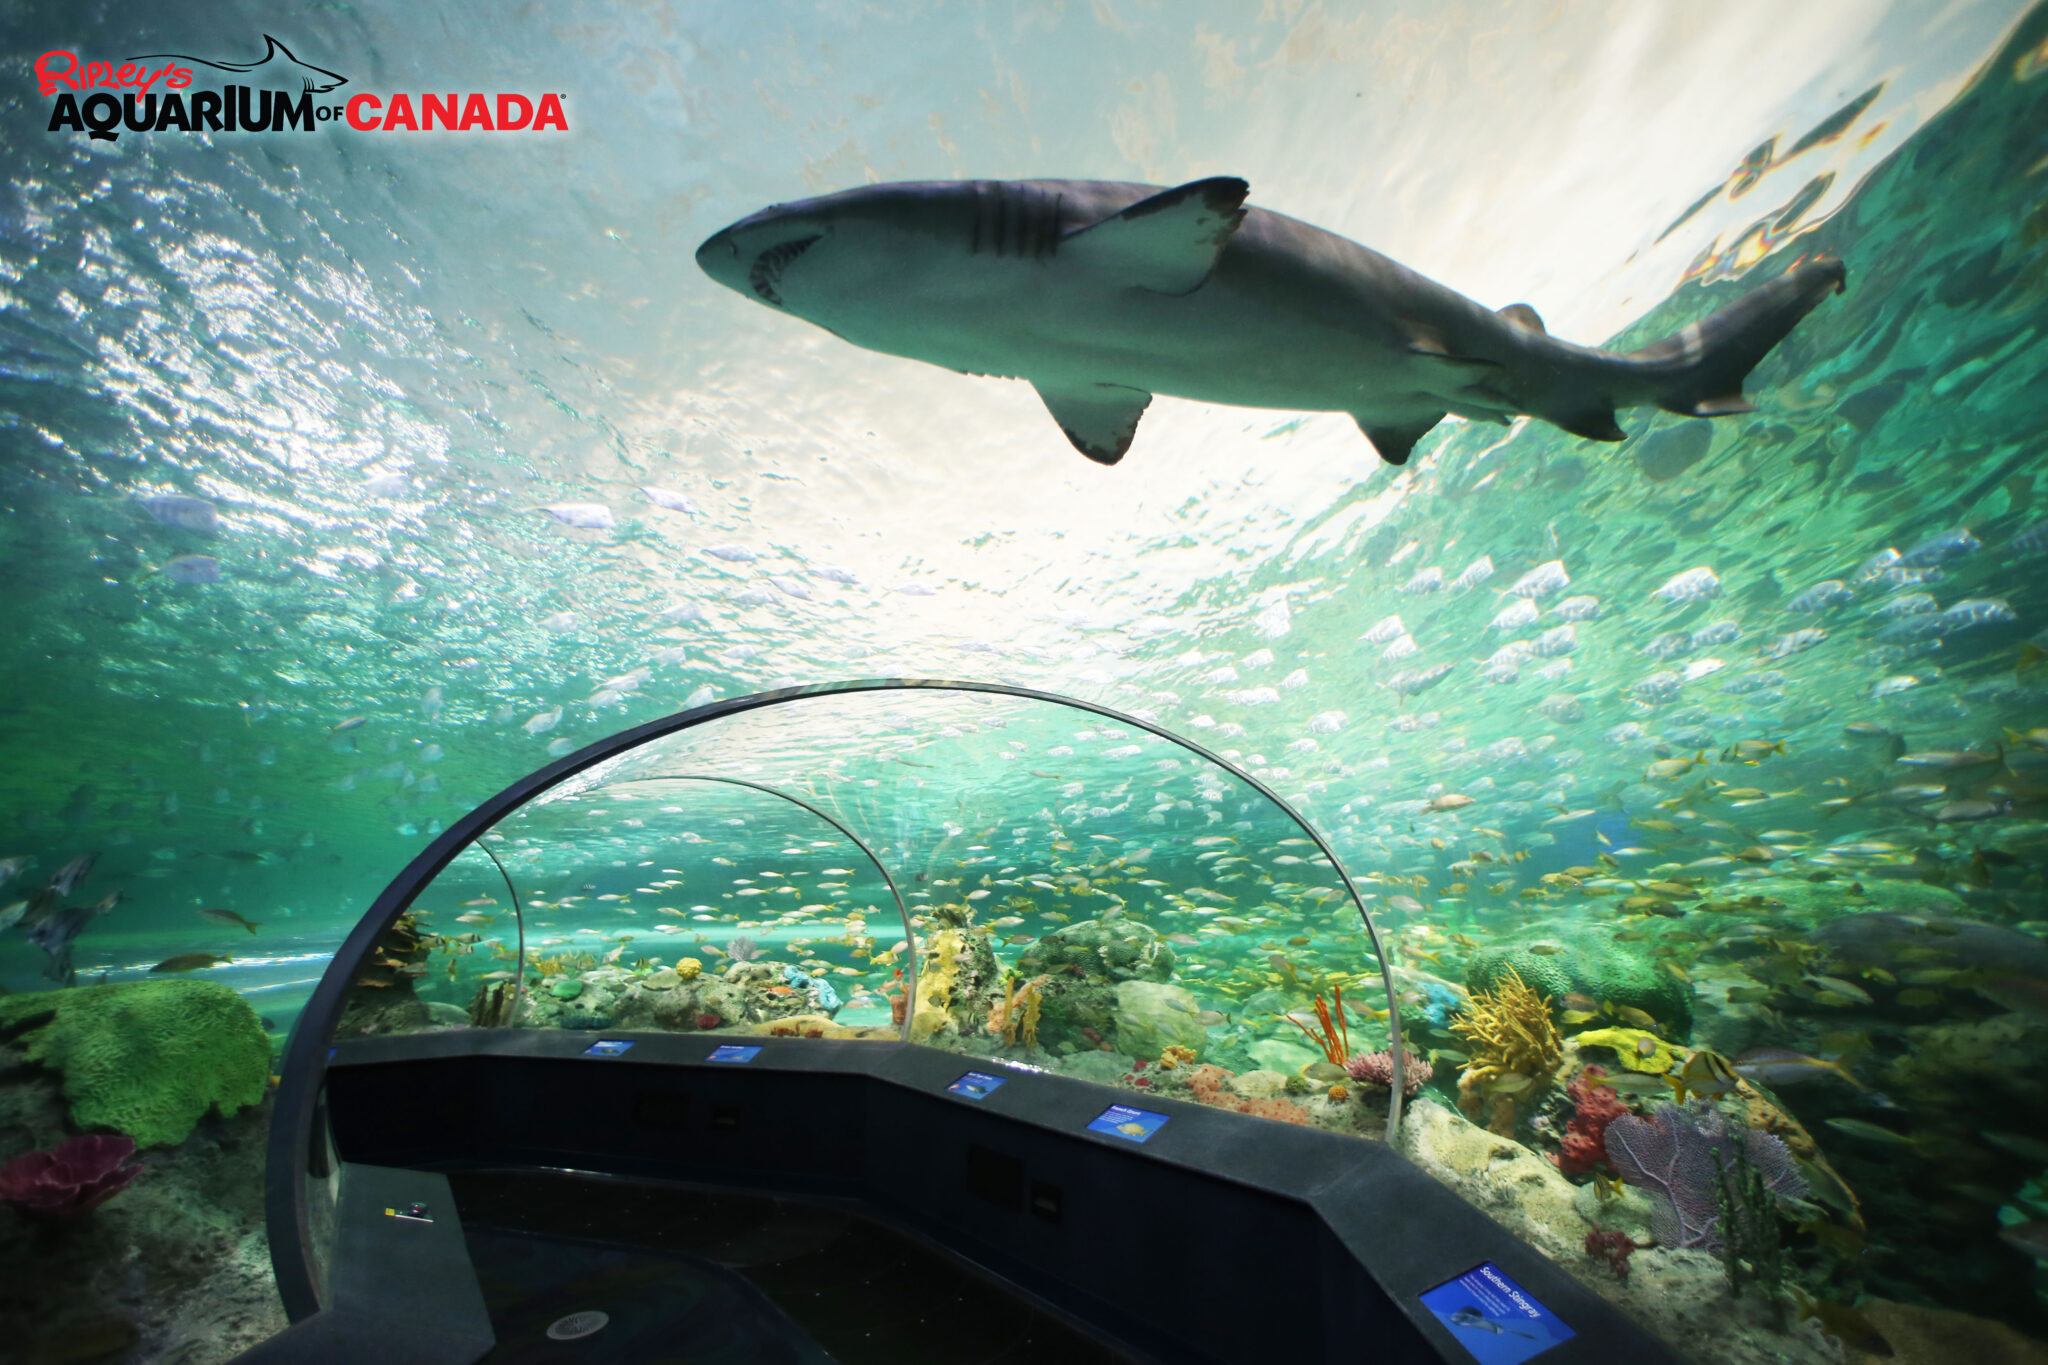 Sleeping with sharks an option at Ripley's Aquarium in downtown Toronto